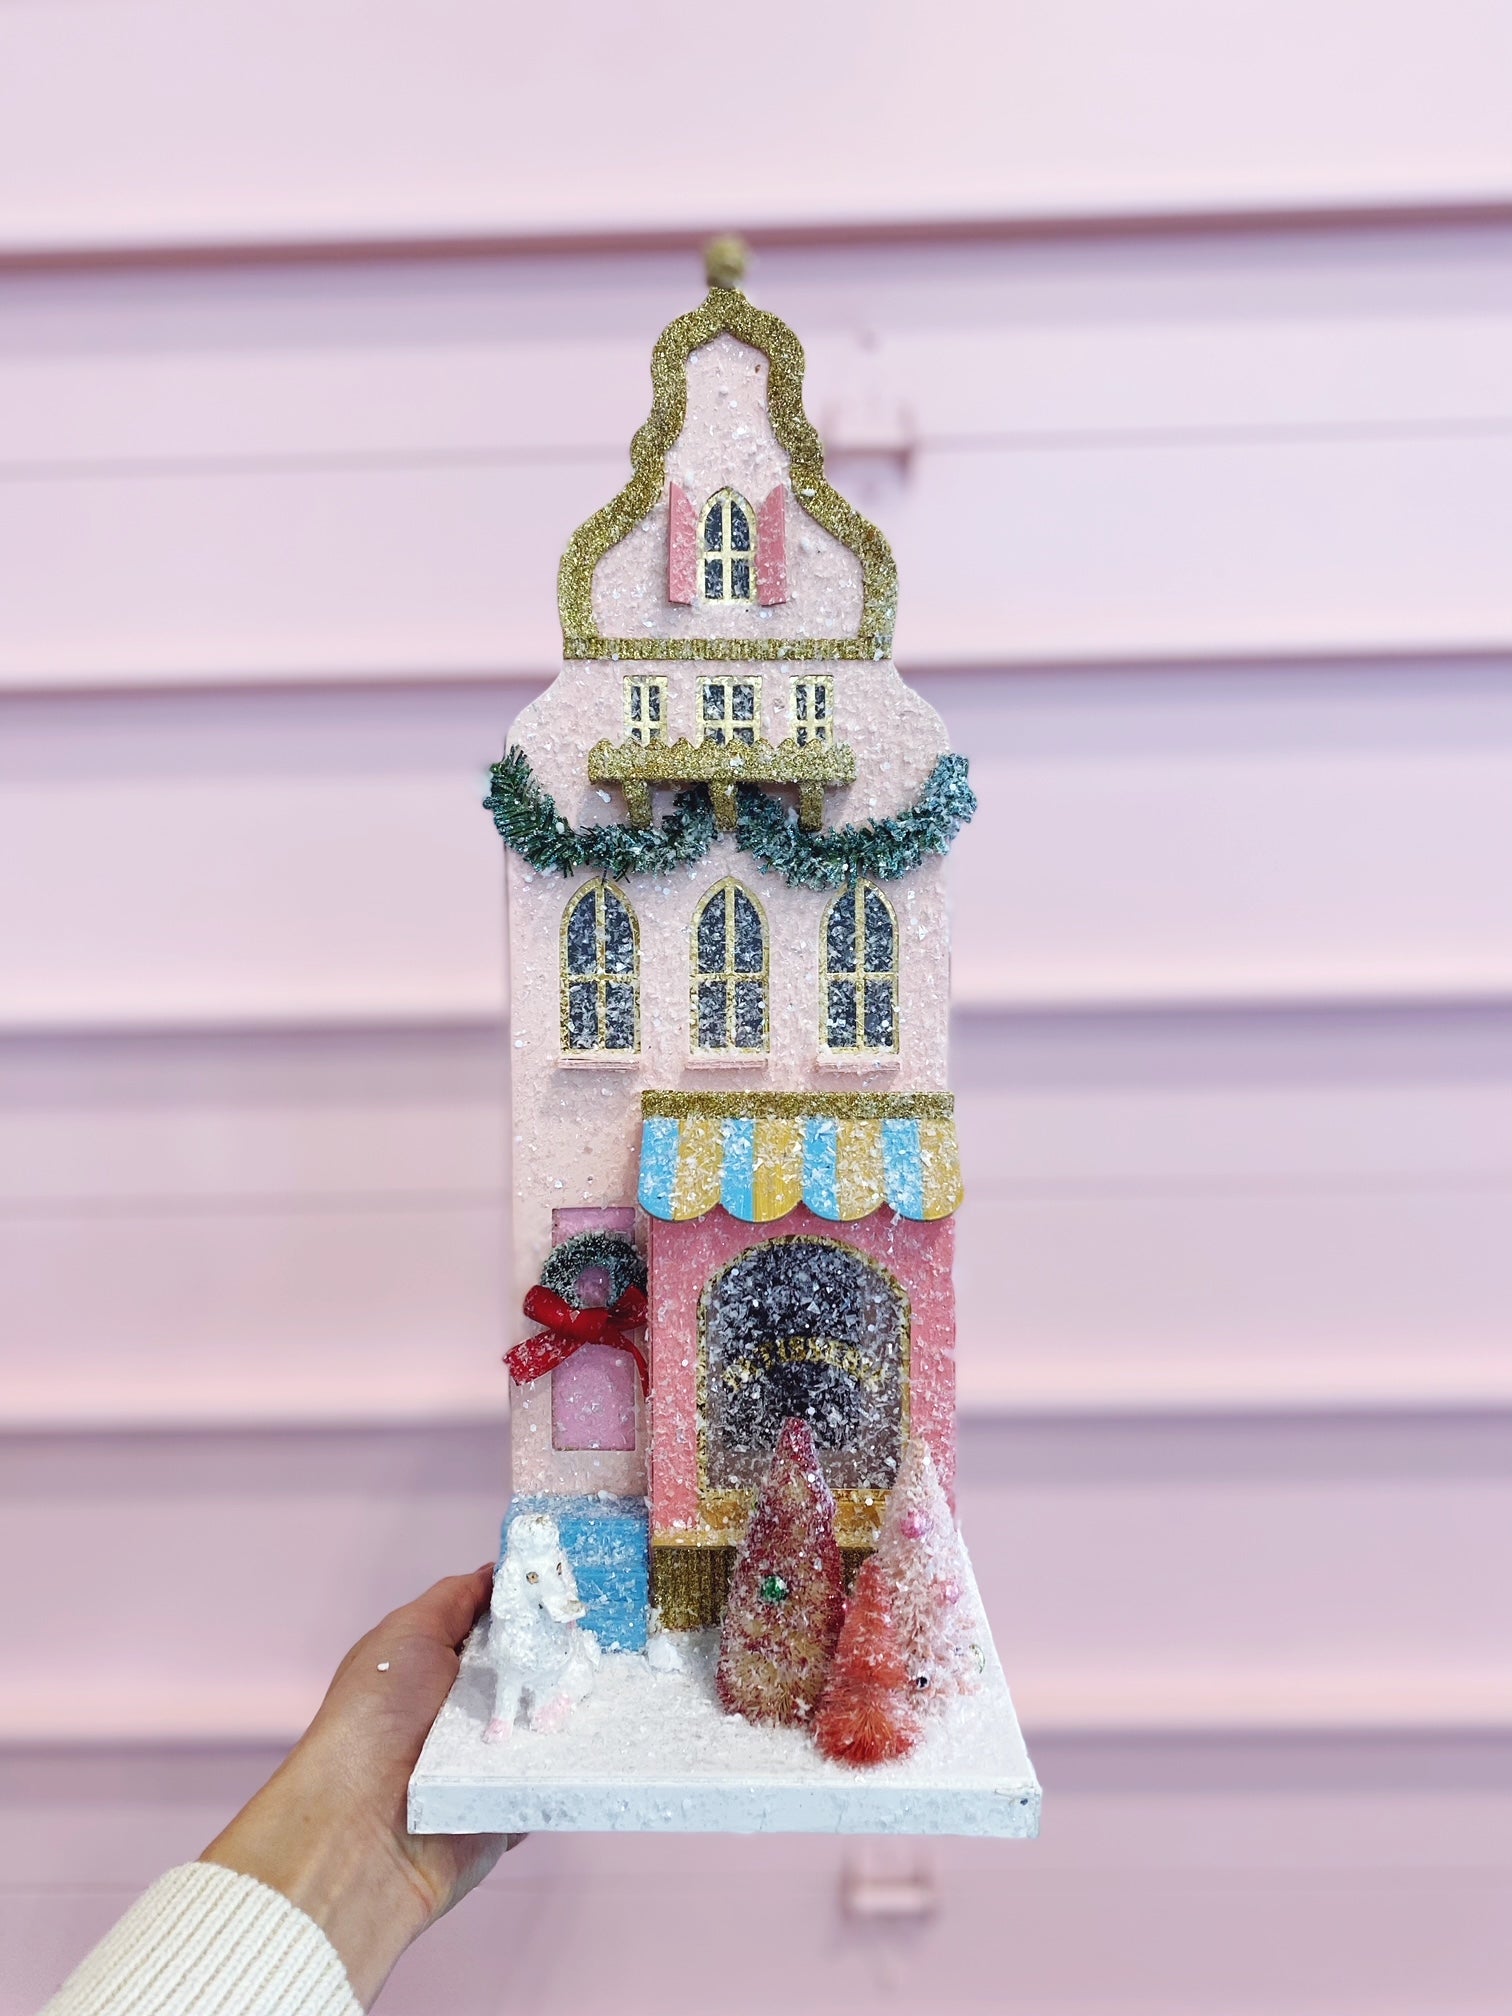 Mini French pastry shop for a tiny Christmas village.